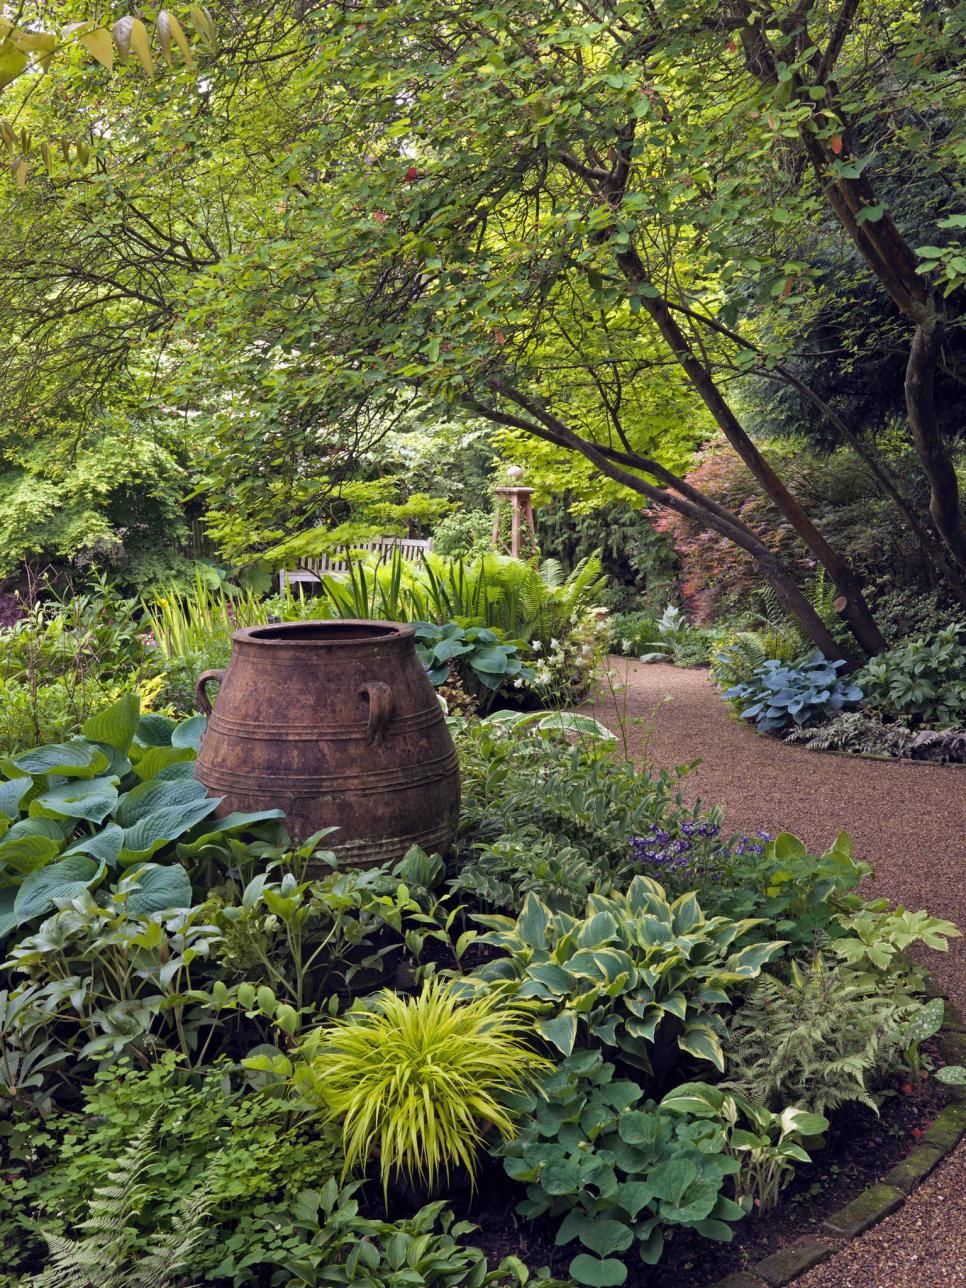 Creating a Lush and Tranquil Shade Garden: Tips for Designing a Beautiful Outdoor Oasis